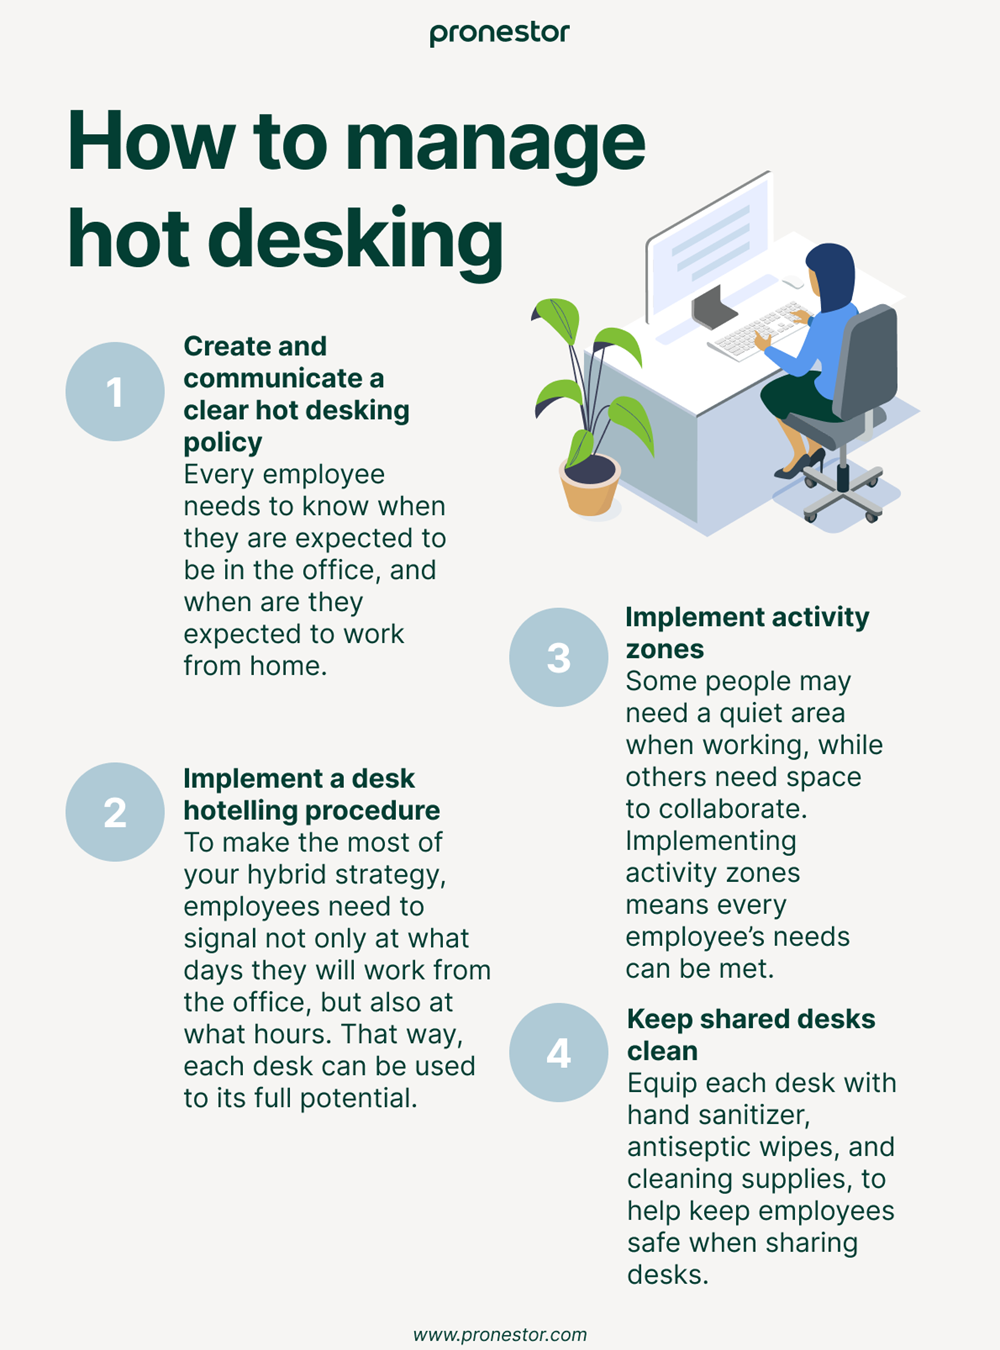 How to manage hot desking